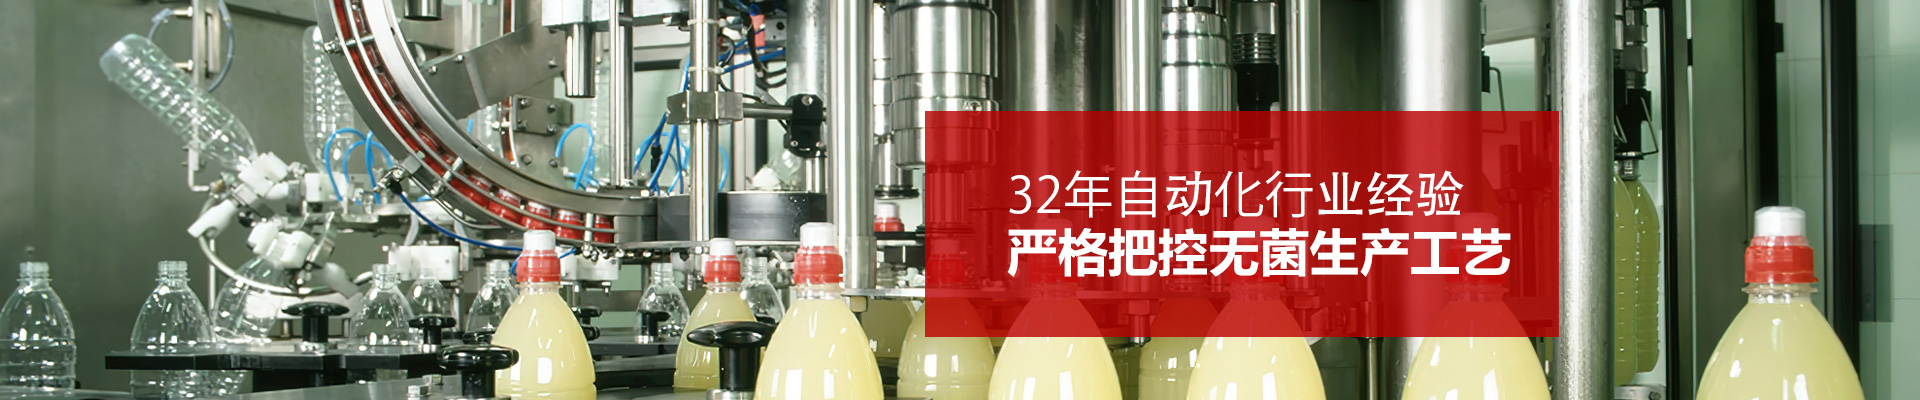 Techgen: 32 years of experience in the automation industry, strictly control the aseptic production process